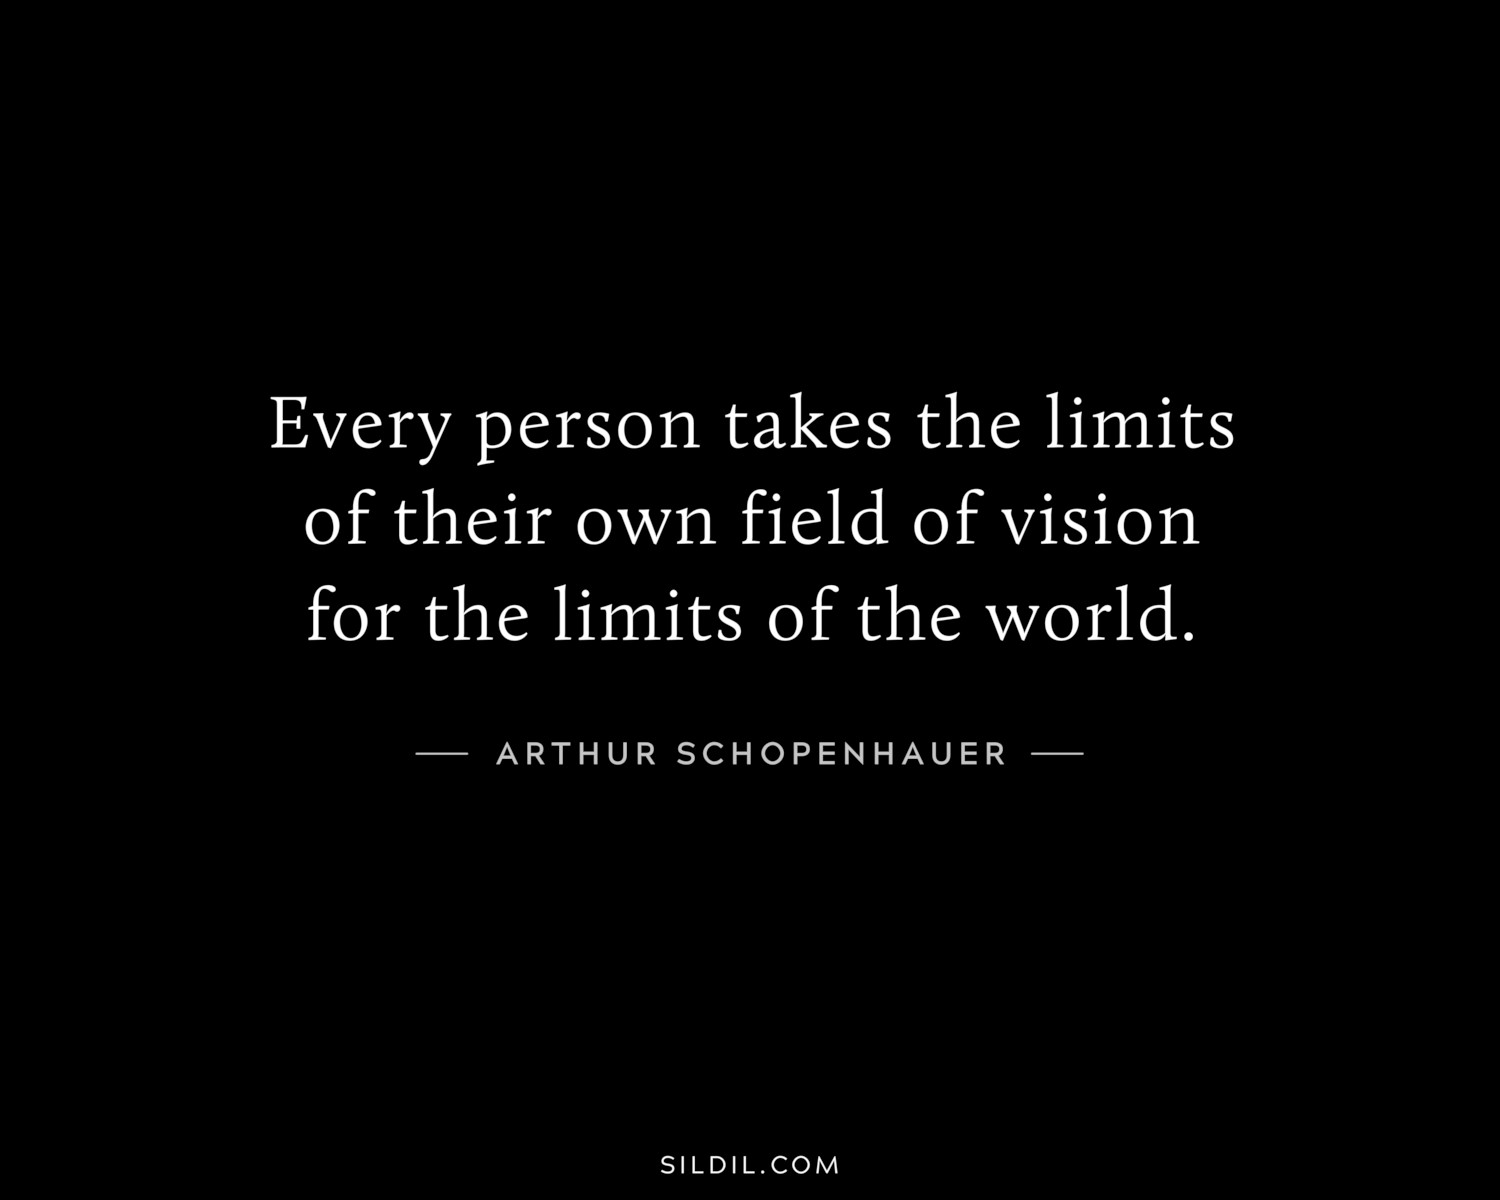 Every person takes the limits of their own field of vision for the limits of the world.